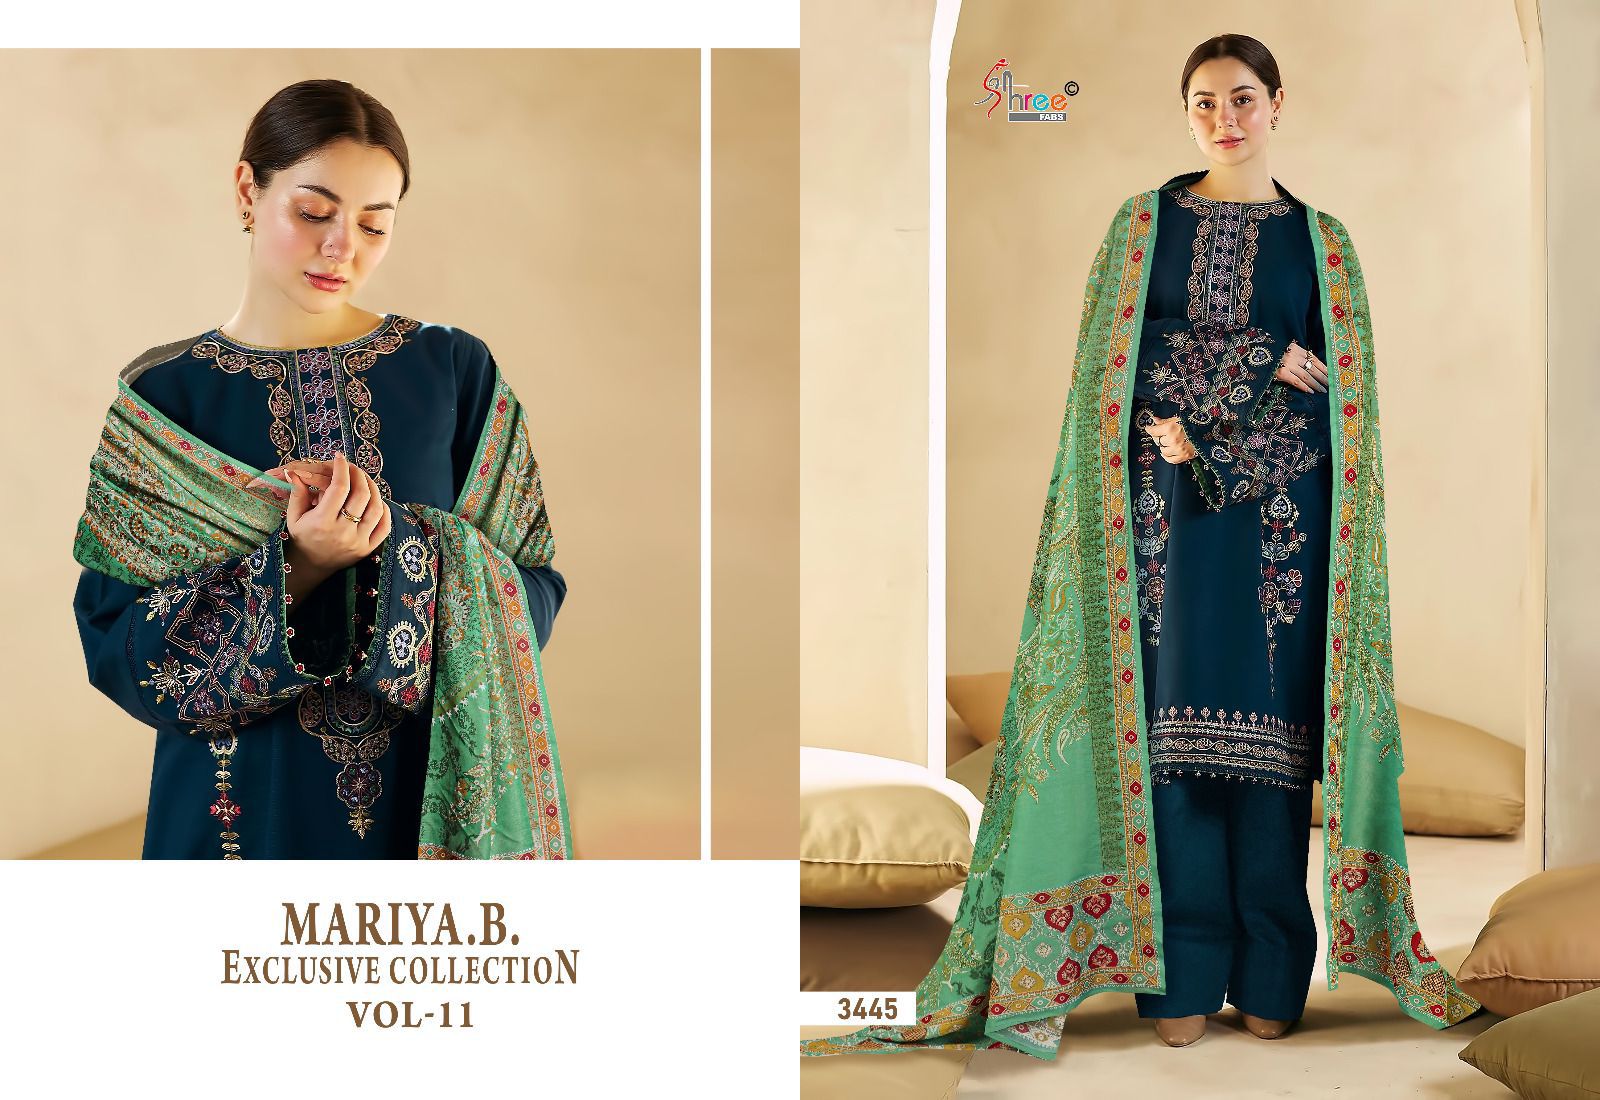 Shree Maria B Exclusive Collection Vol 11 collection 9